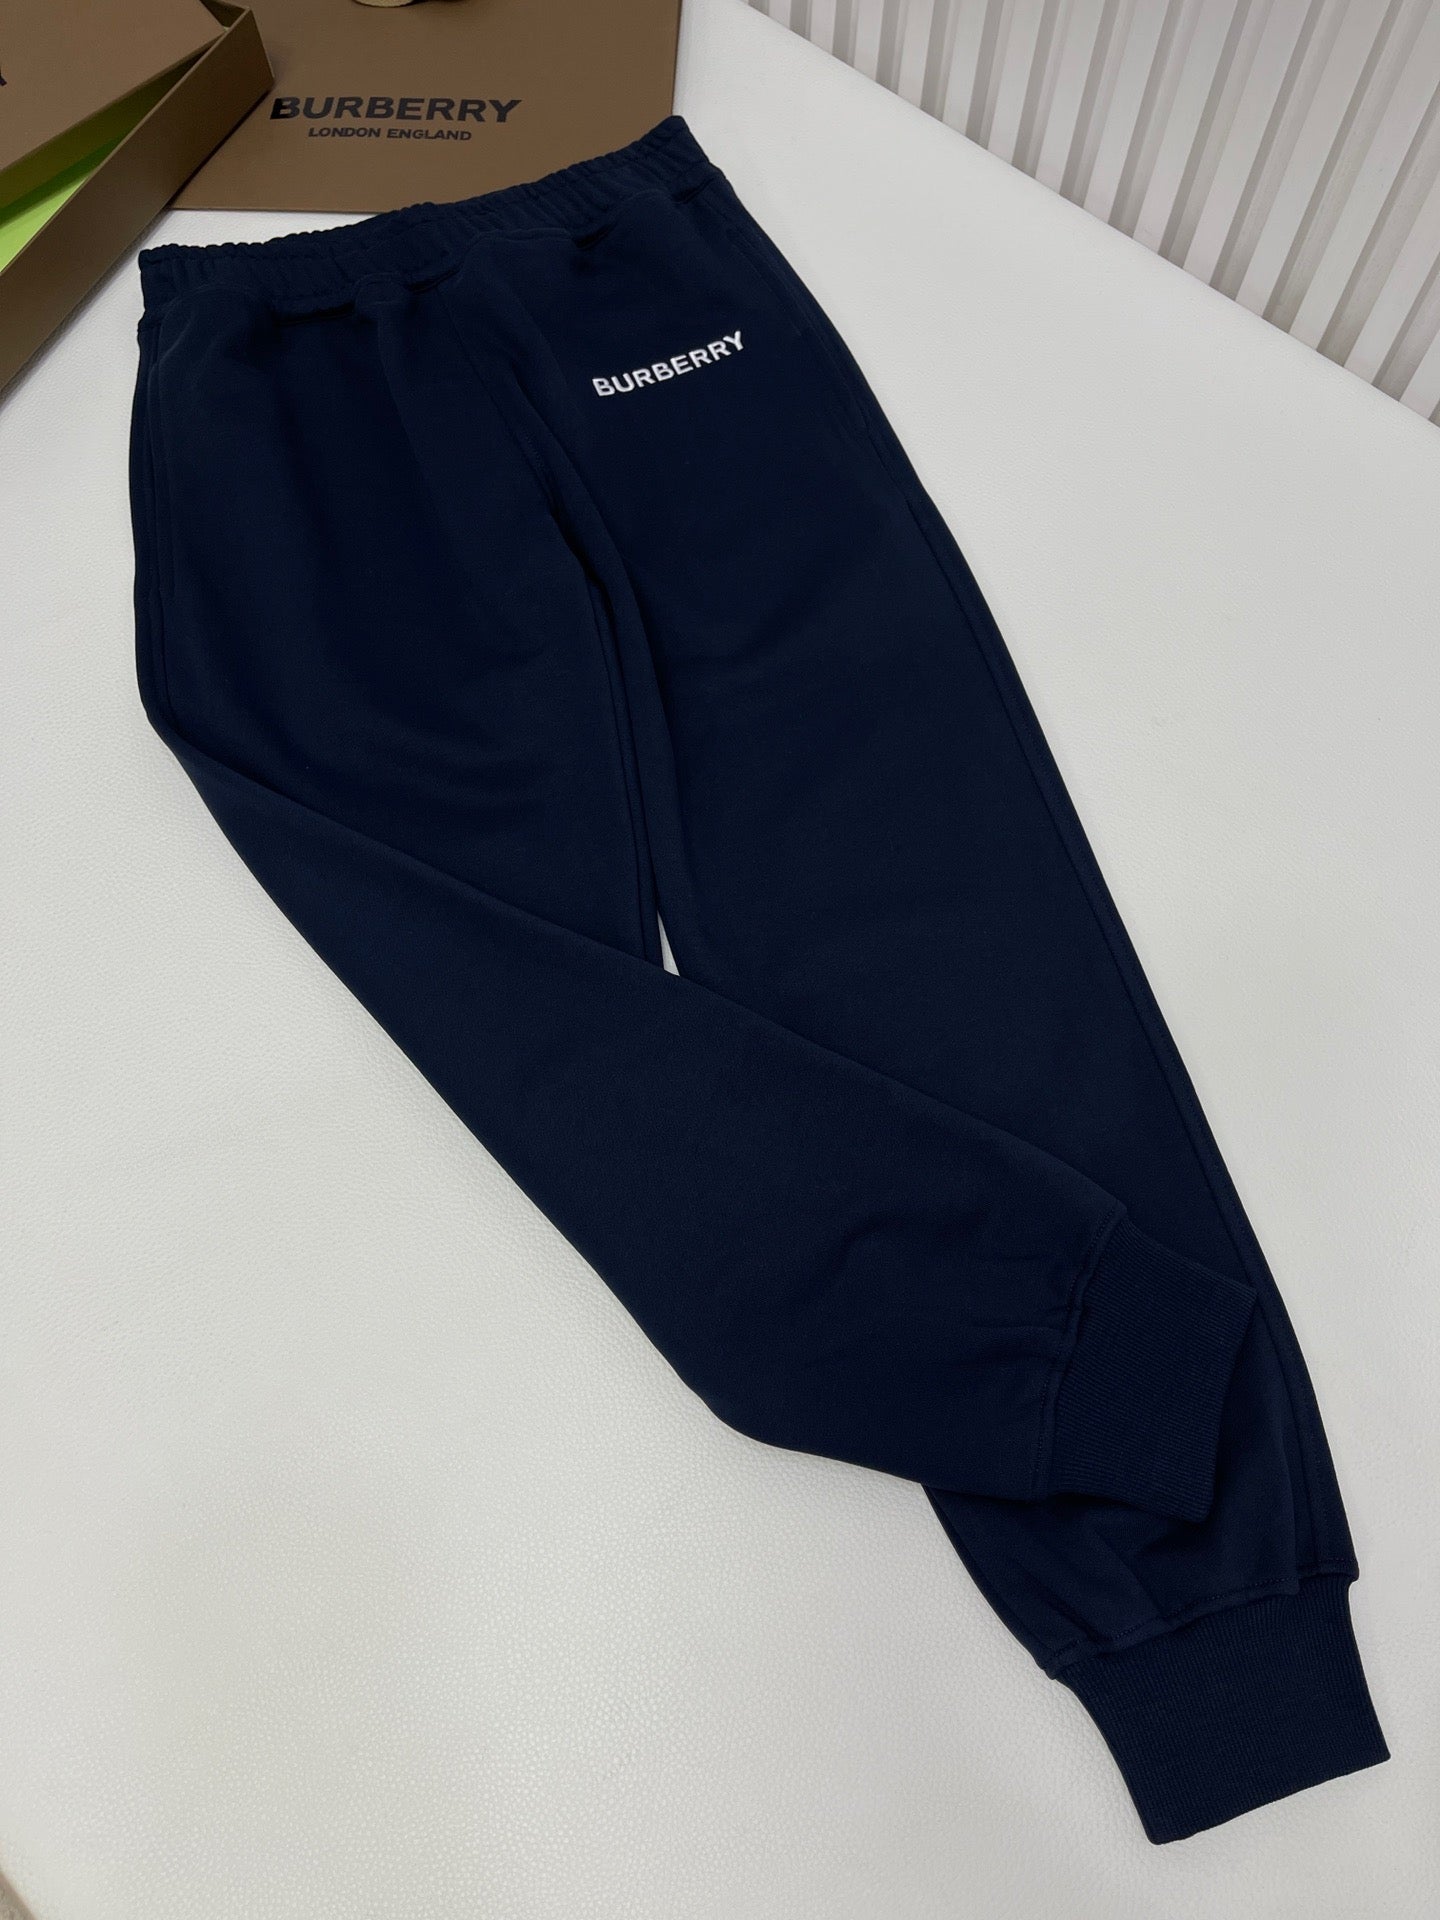 Black and Blue Pant